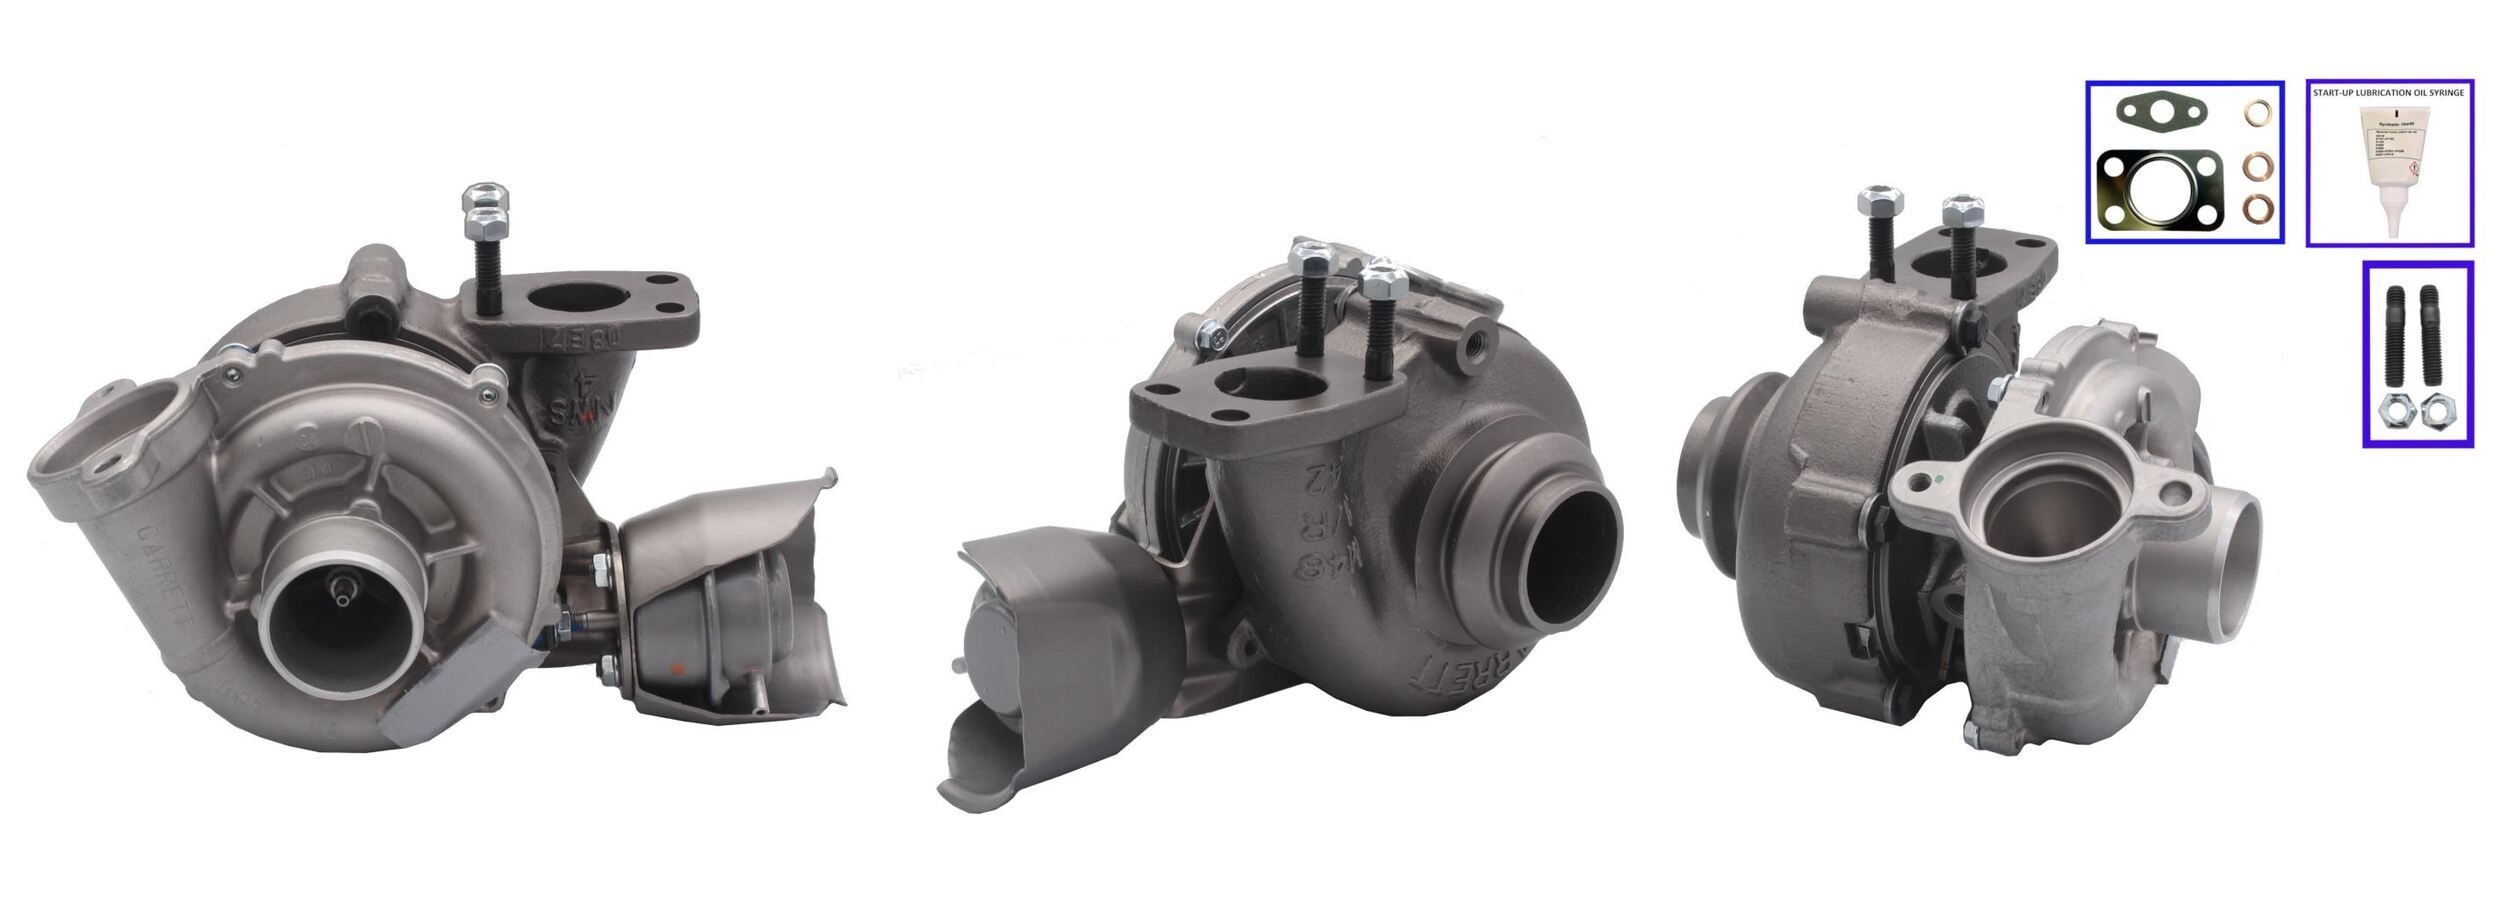 LUCAS LTRPA7534202 Turbocharger Exhaust Turbocharger, Pneumatically controlled actuator, with gaskets/seals